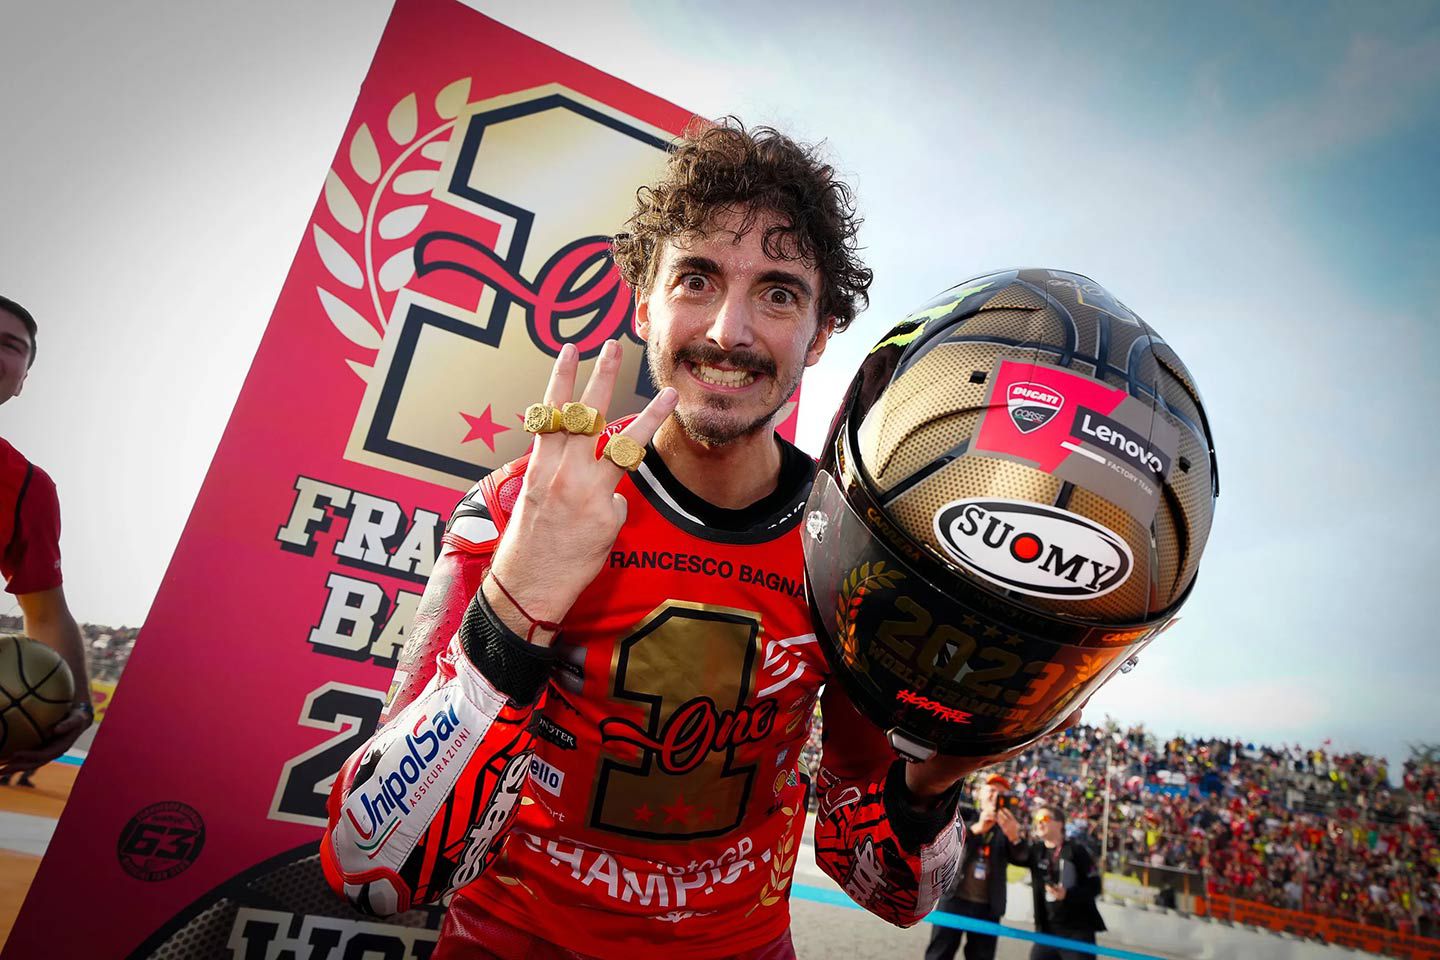 Will Bagnaia make it a three-peat in MotoGP and add a fourth ring to his collection?